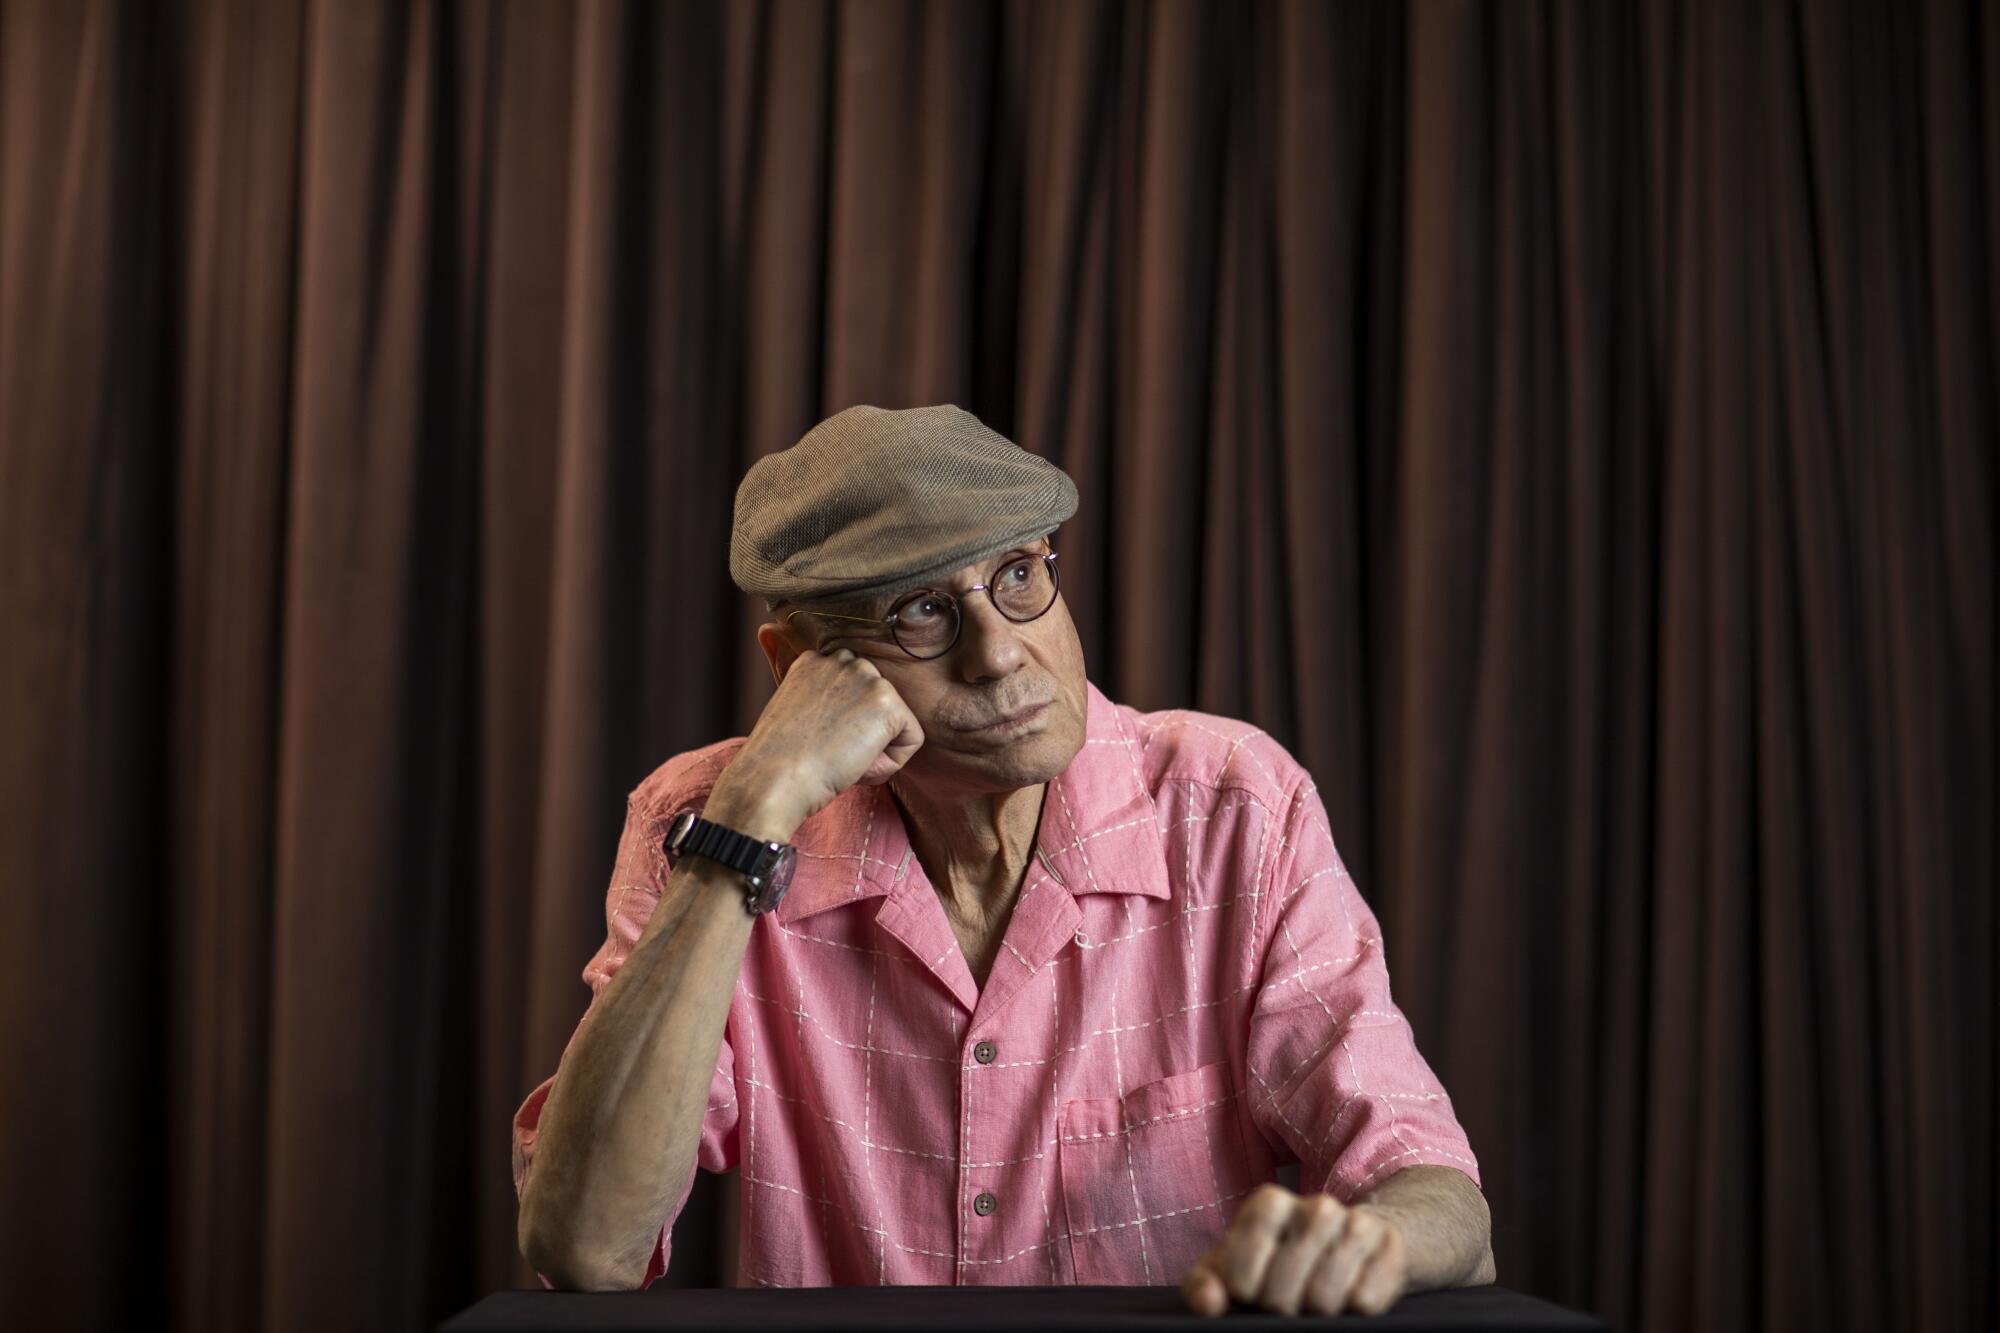 James Ellroy, author of "The Enchanters: A Novel," at the Los Angeles Times Festival of Books Portrait Studio.